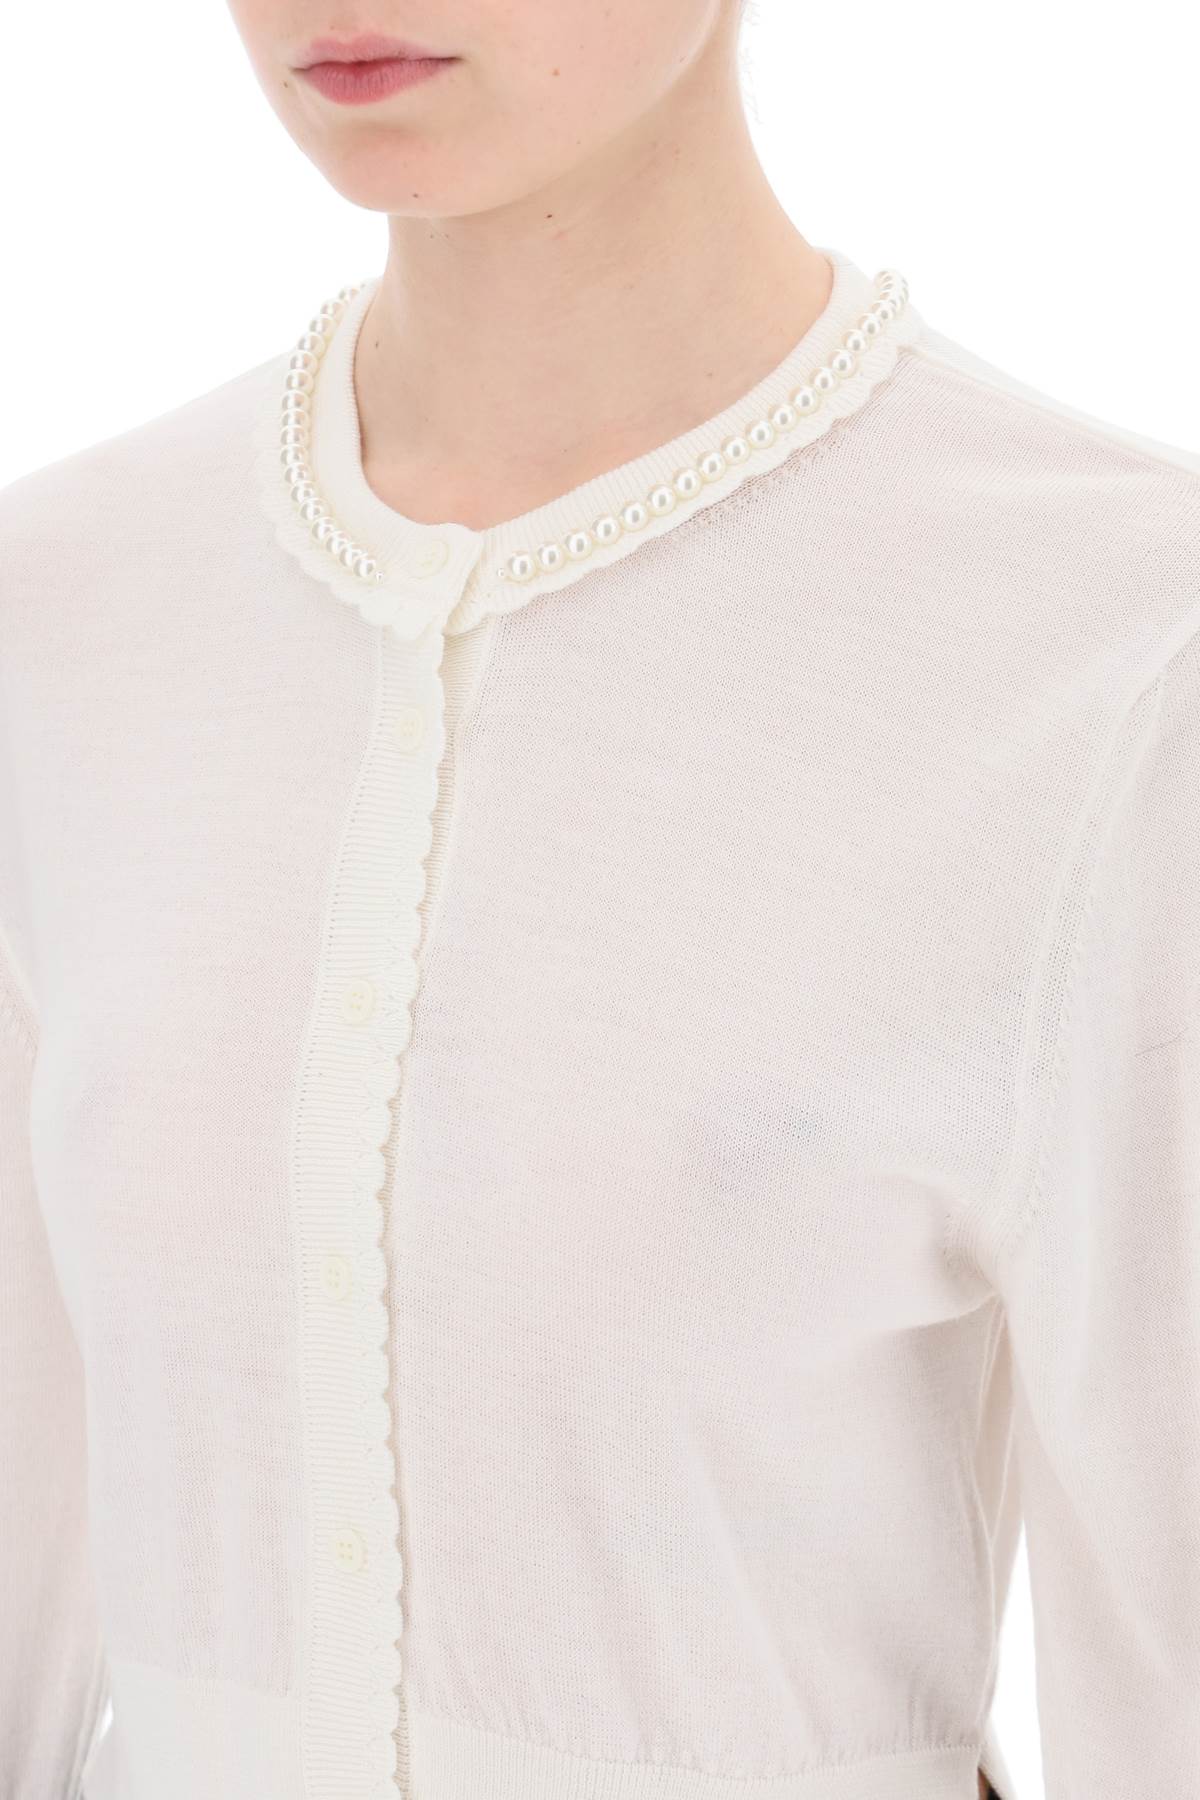 Simone rocha cropped cardigan with pearls-3